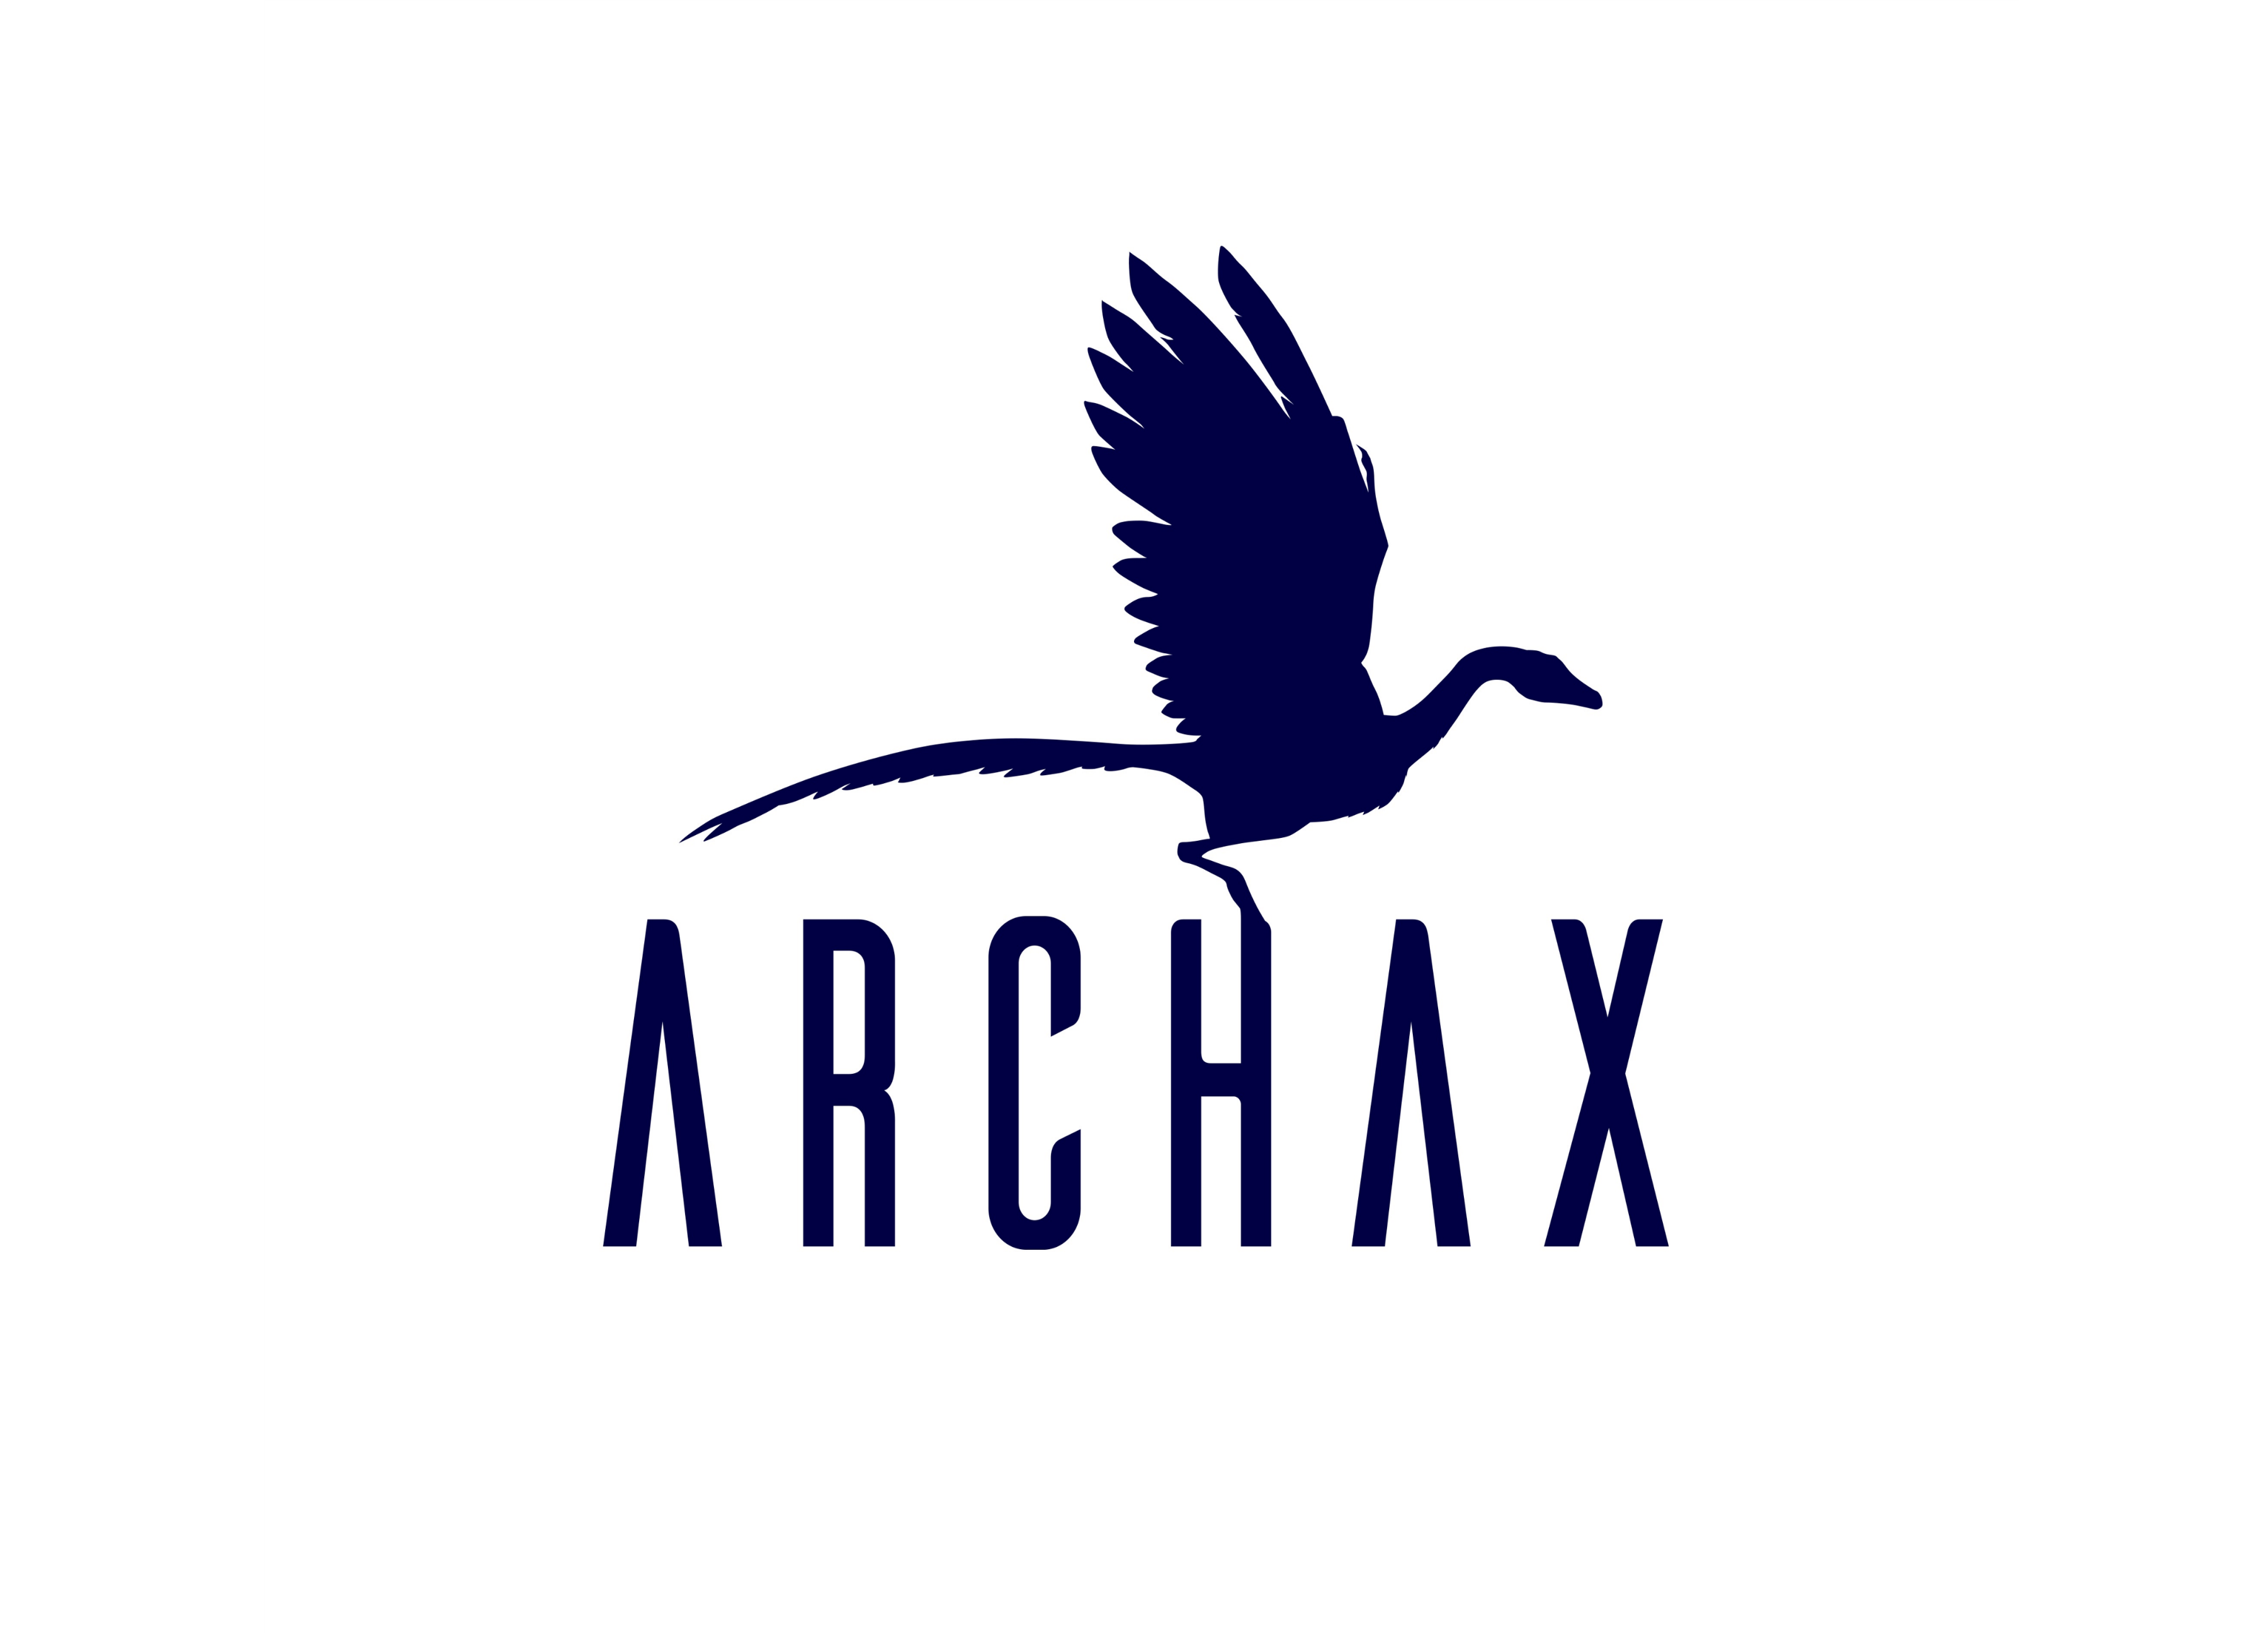 Archax and Ownera Partner to Deliver Global Distribution for Digital Securities